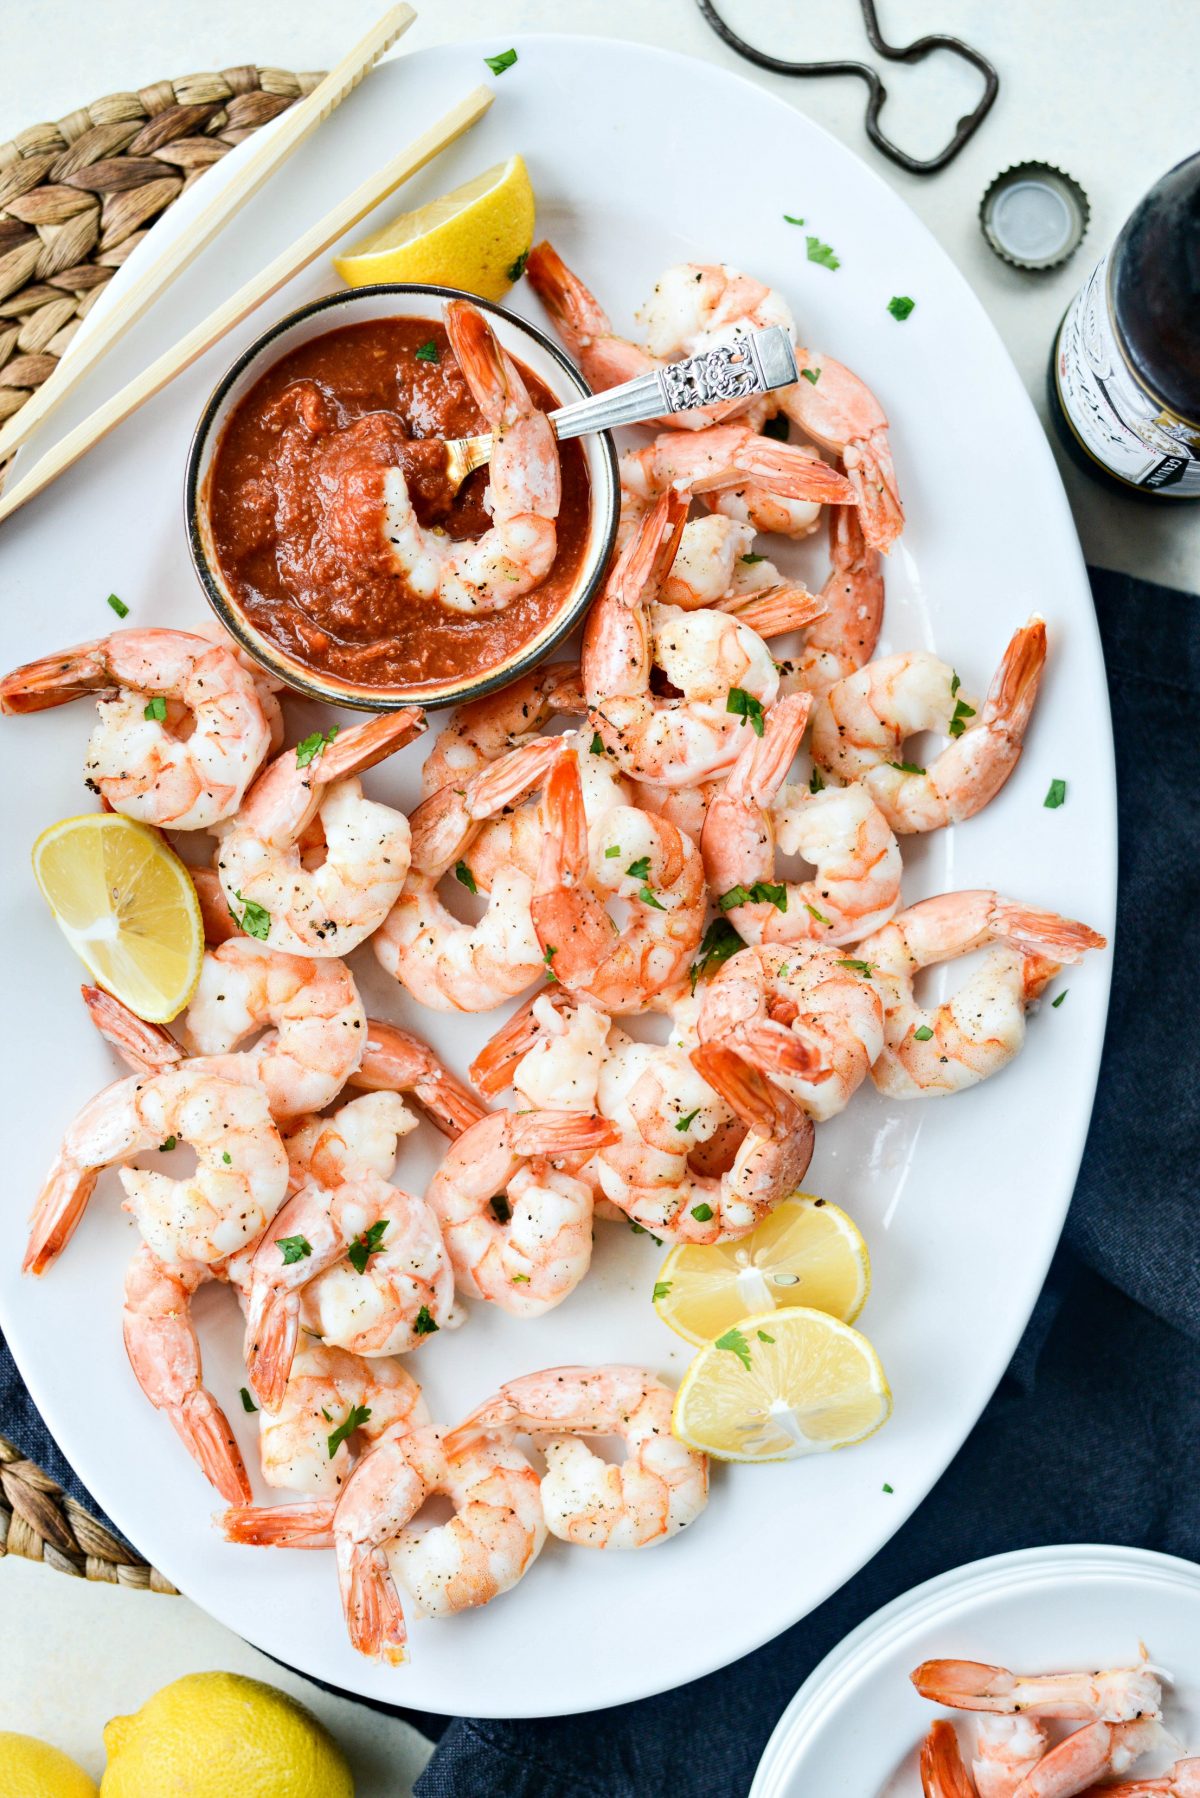 Roasted Shrimp with Homemade Cocktail Sauce l SimplyScratch.com #shrimp #cocktail #easy #appetizer #homemade #holiday #food